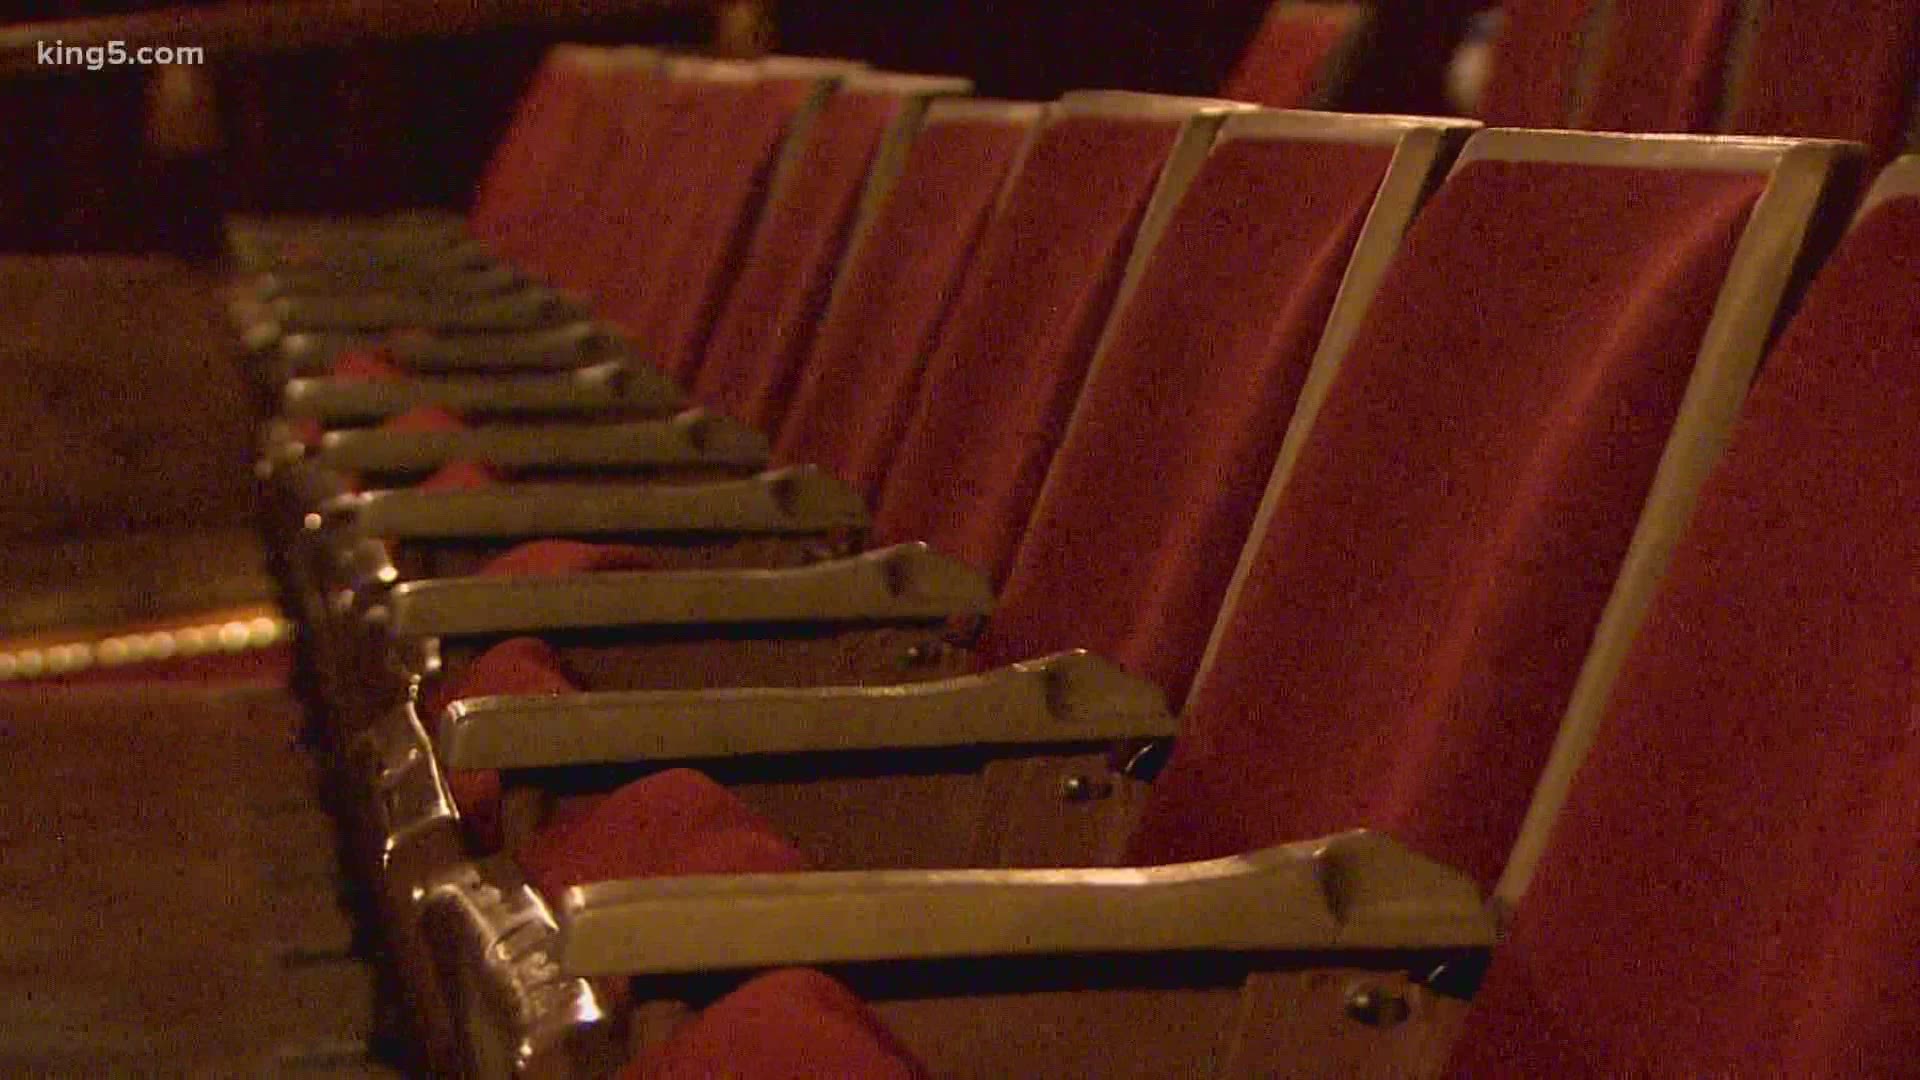 If President Donald Trump signs the current bill COVID-19 relief bill, $15 billion would go to struggling theaters like Ark Lodge Cinemas in Seattle.